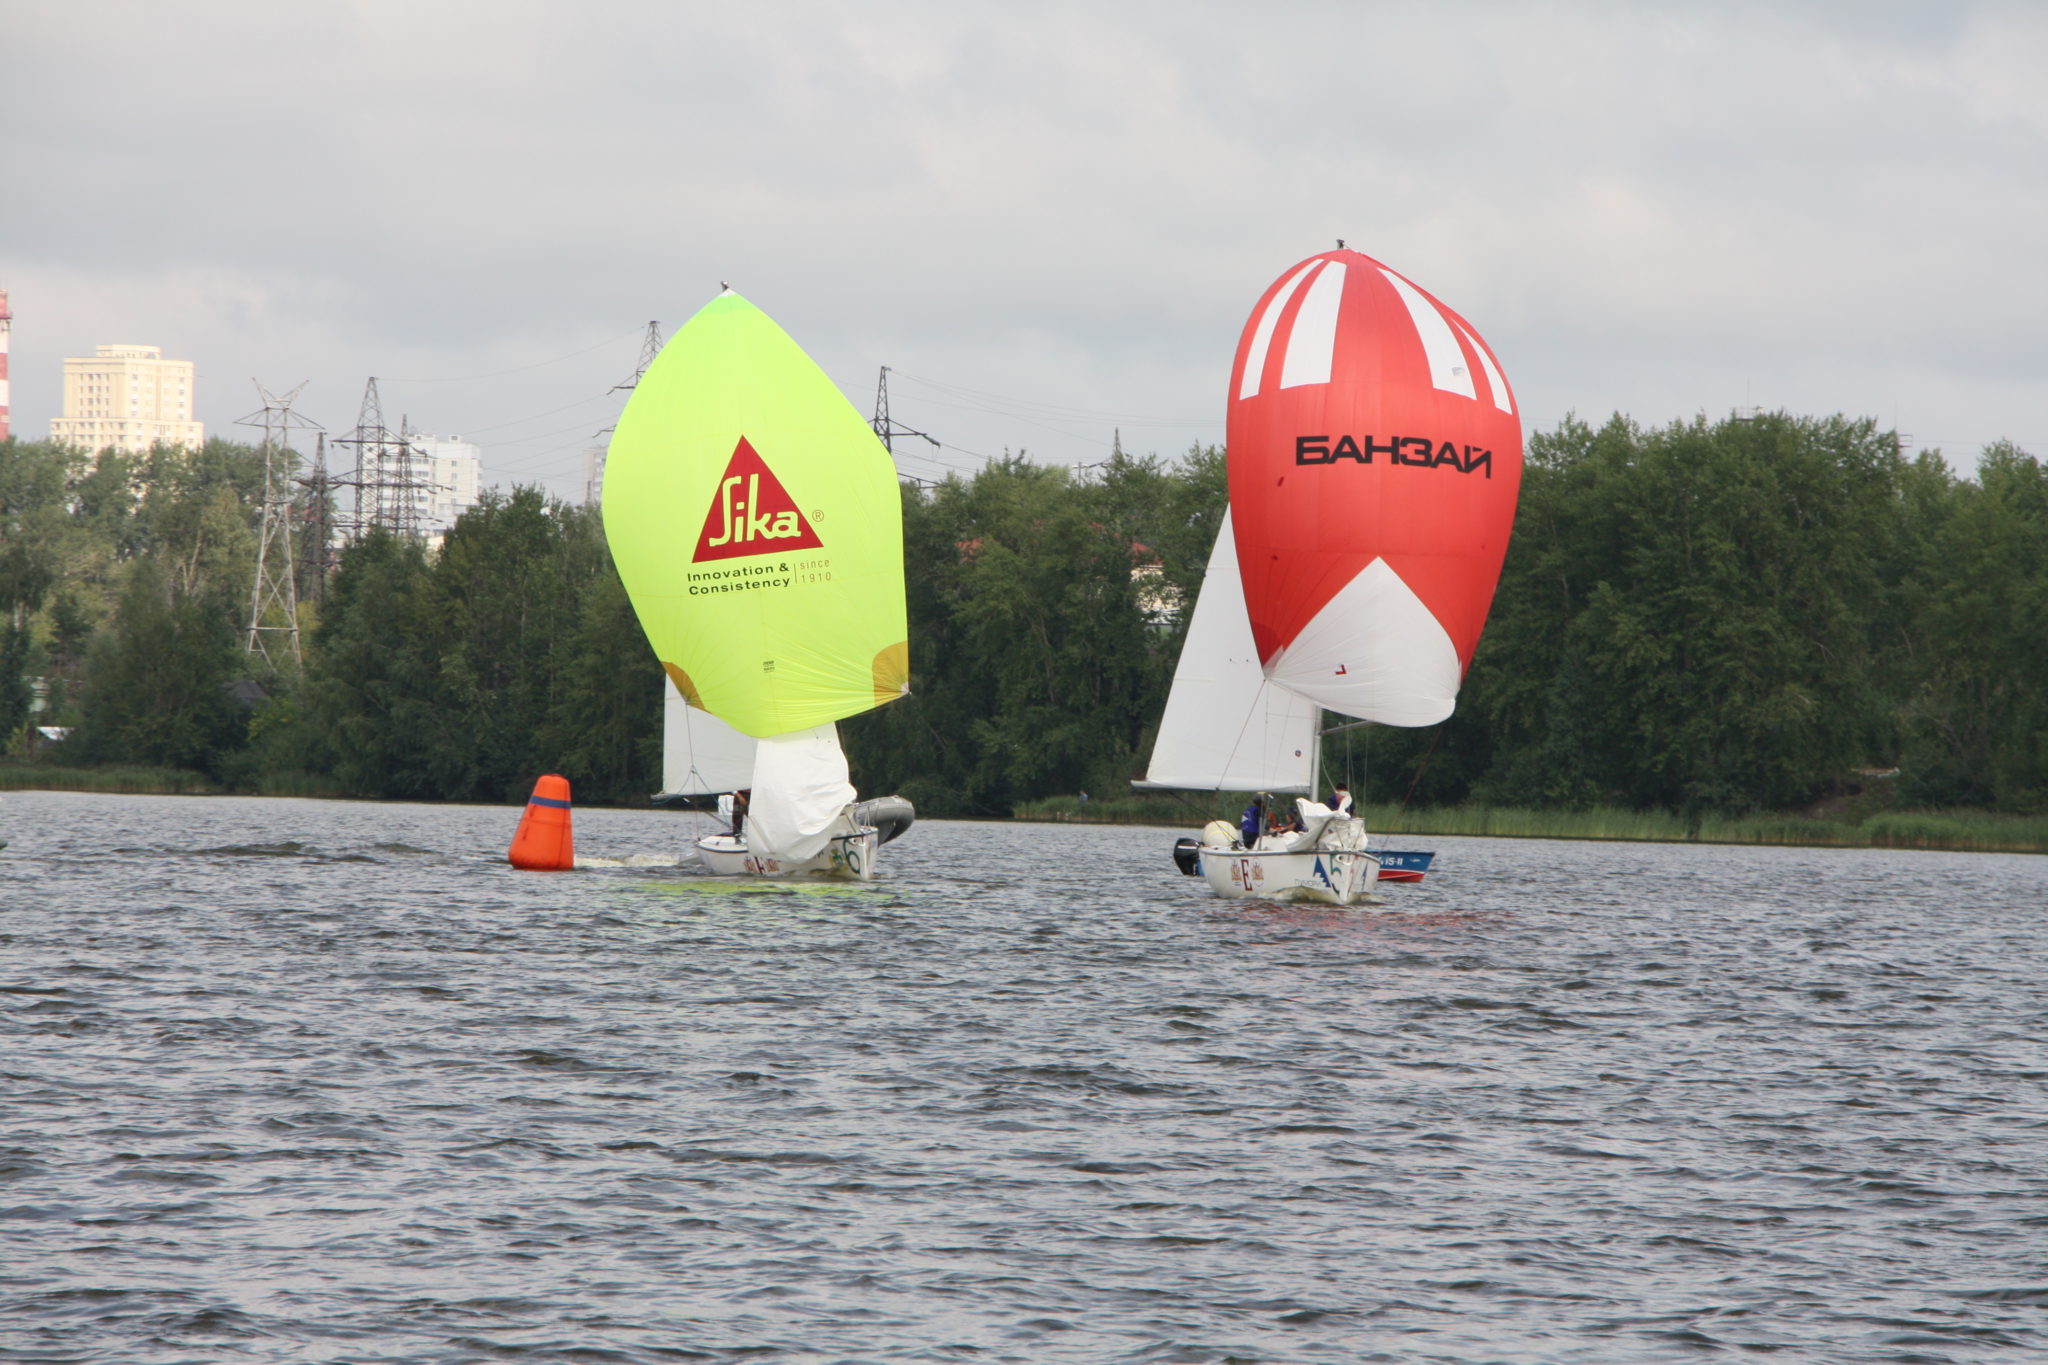  Match Racing  Youth World Championship 2019  Ekaterinburg RUS  Day 2, Parkin USA 5th after Round Robin I